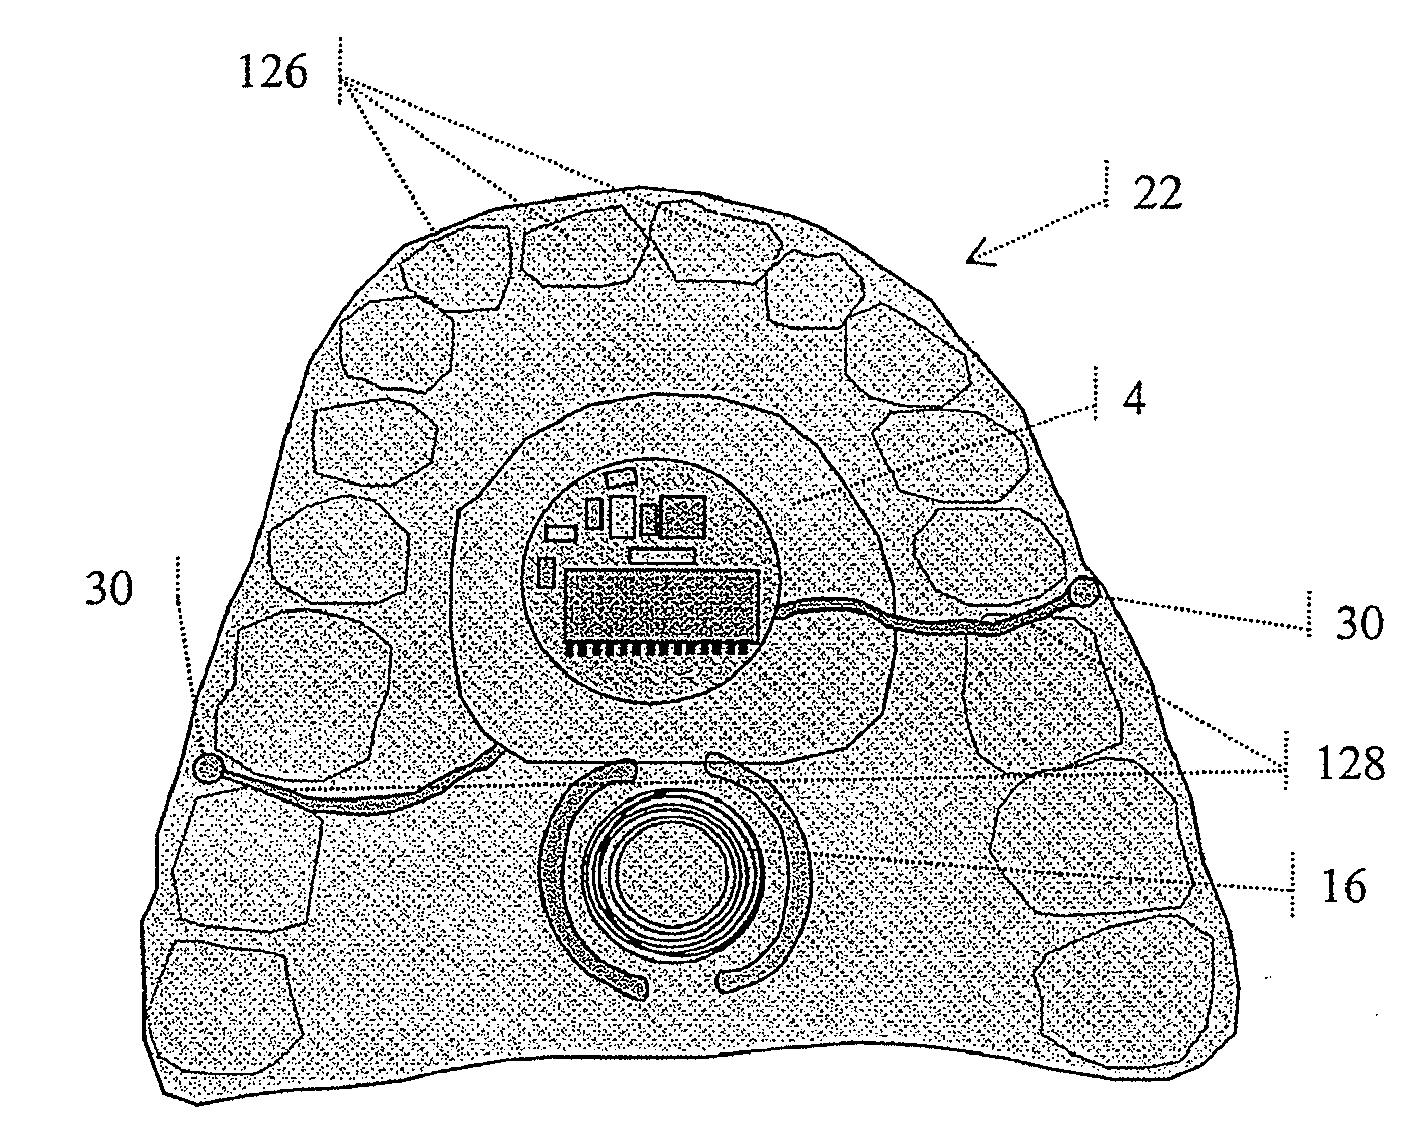 Palatal Implant Fixation Devices and Methods